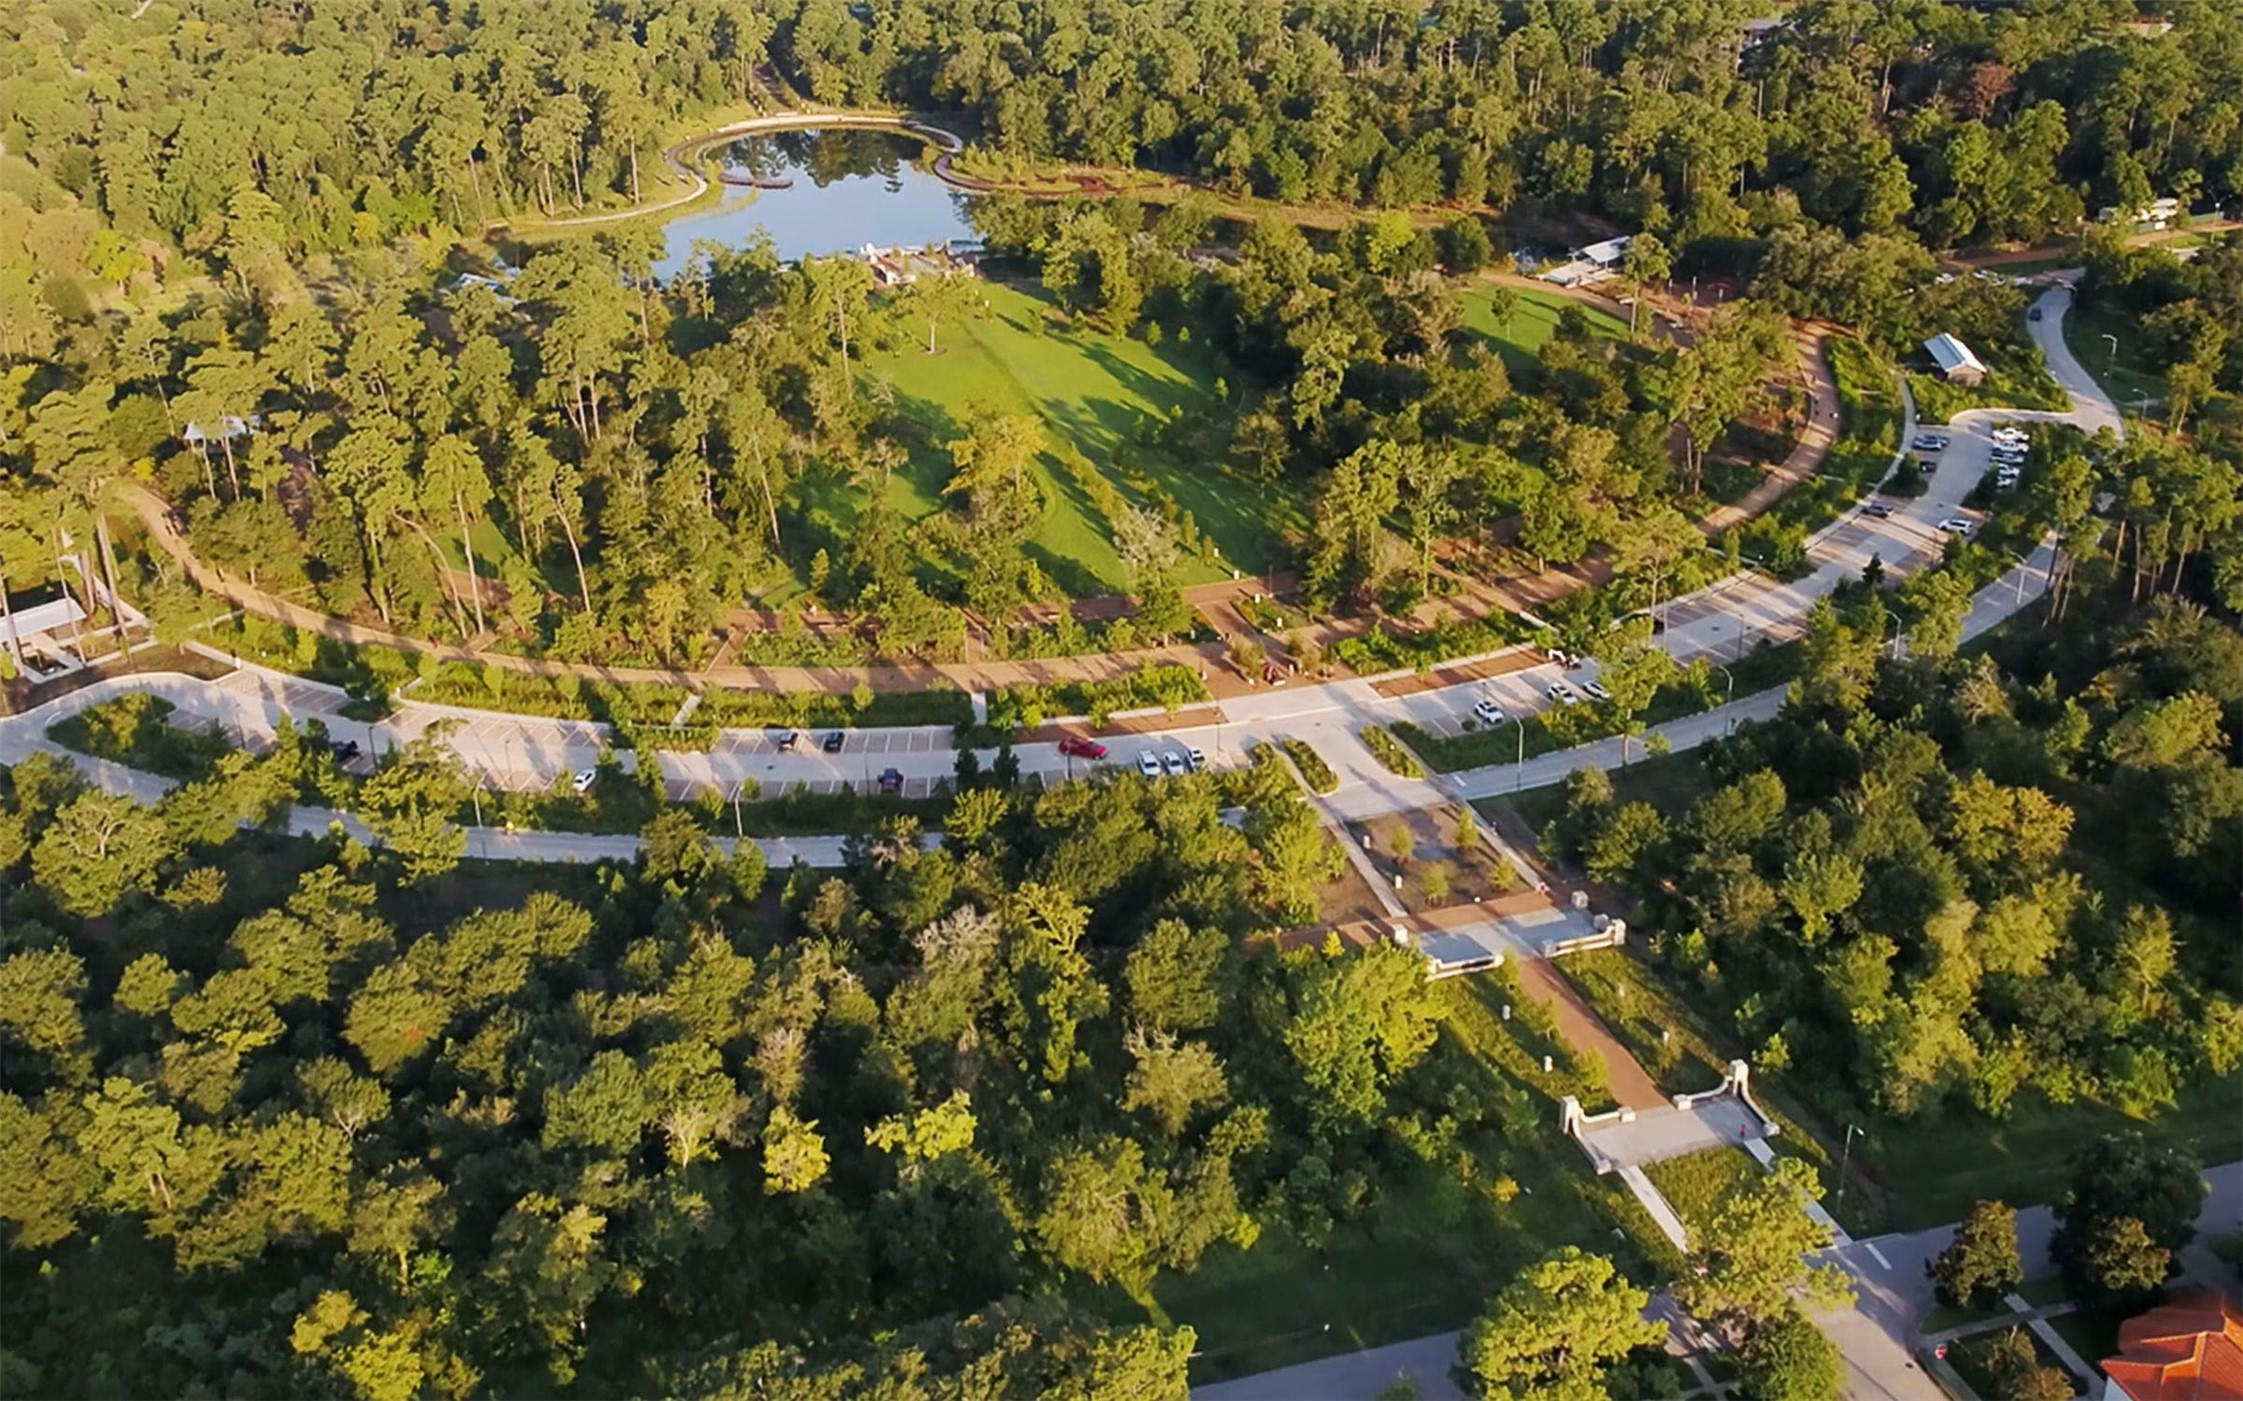 Memorial Park, Houston's largest urban-center park, has something for everyone; golf, tennis, swimming pool, running and mountain biking trail.